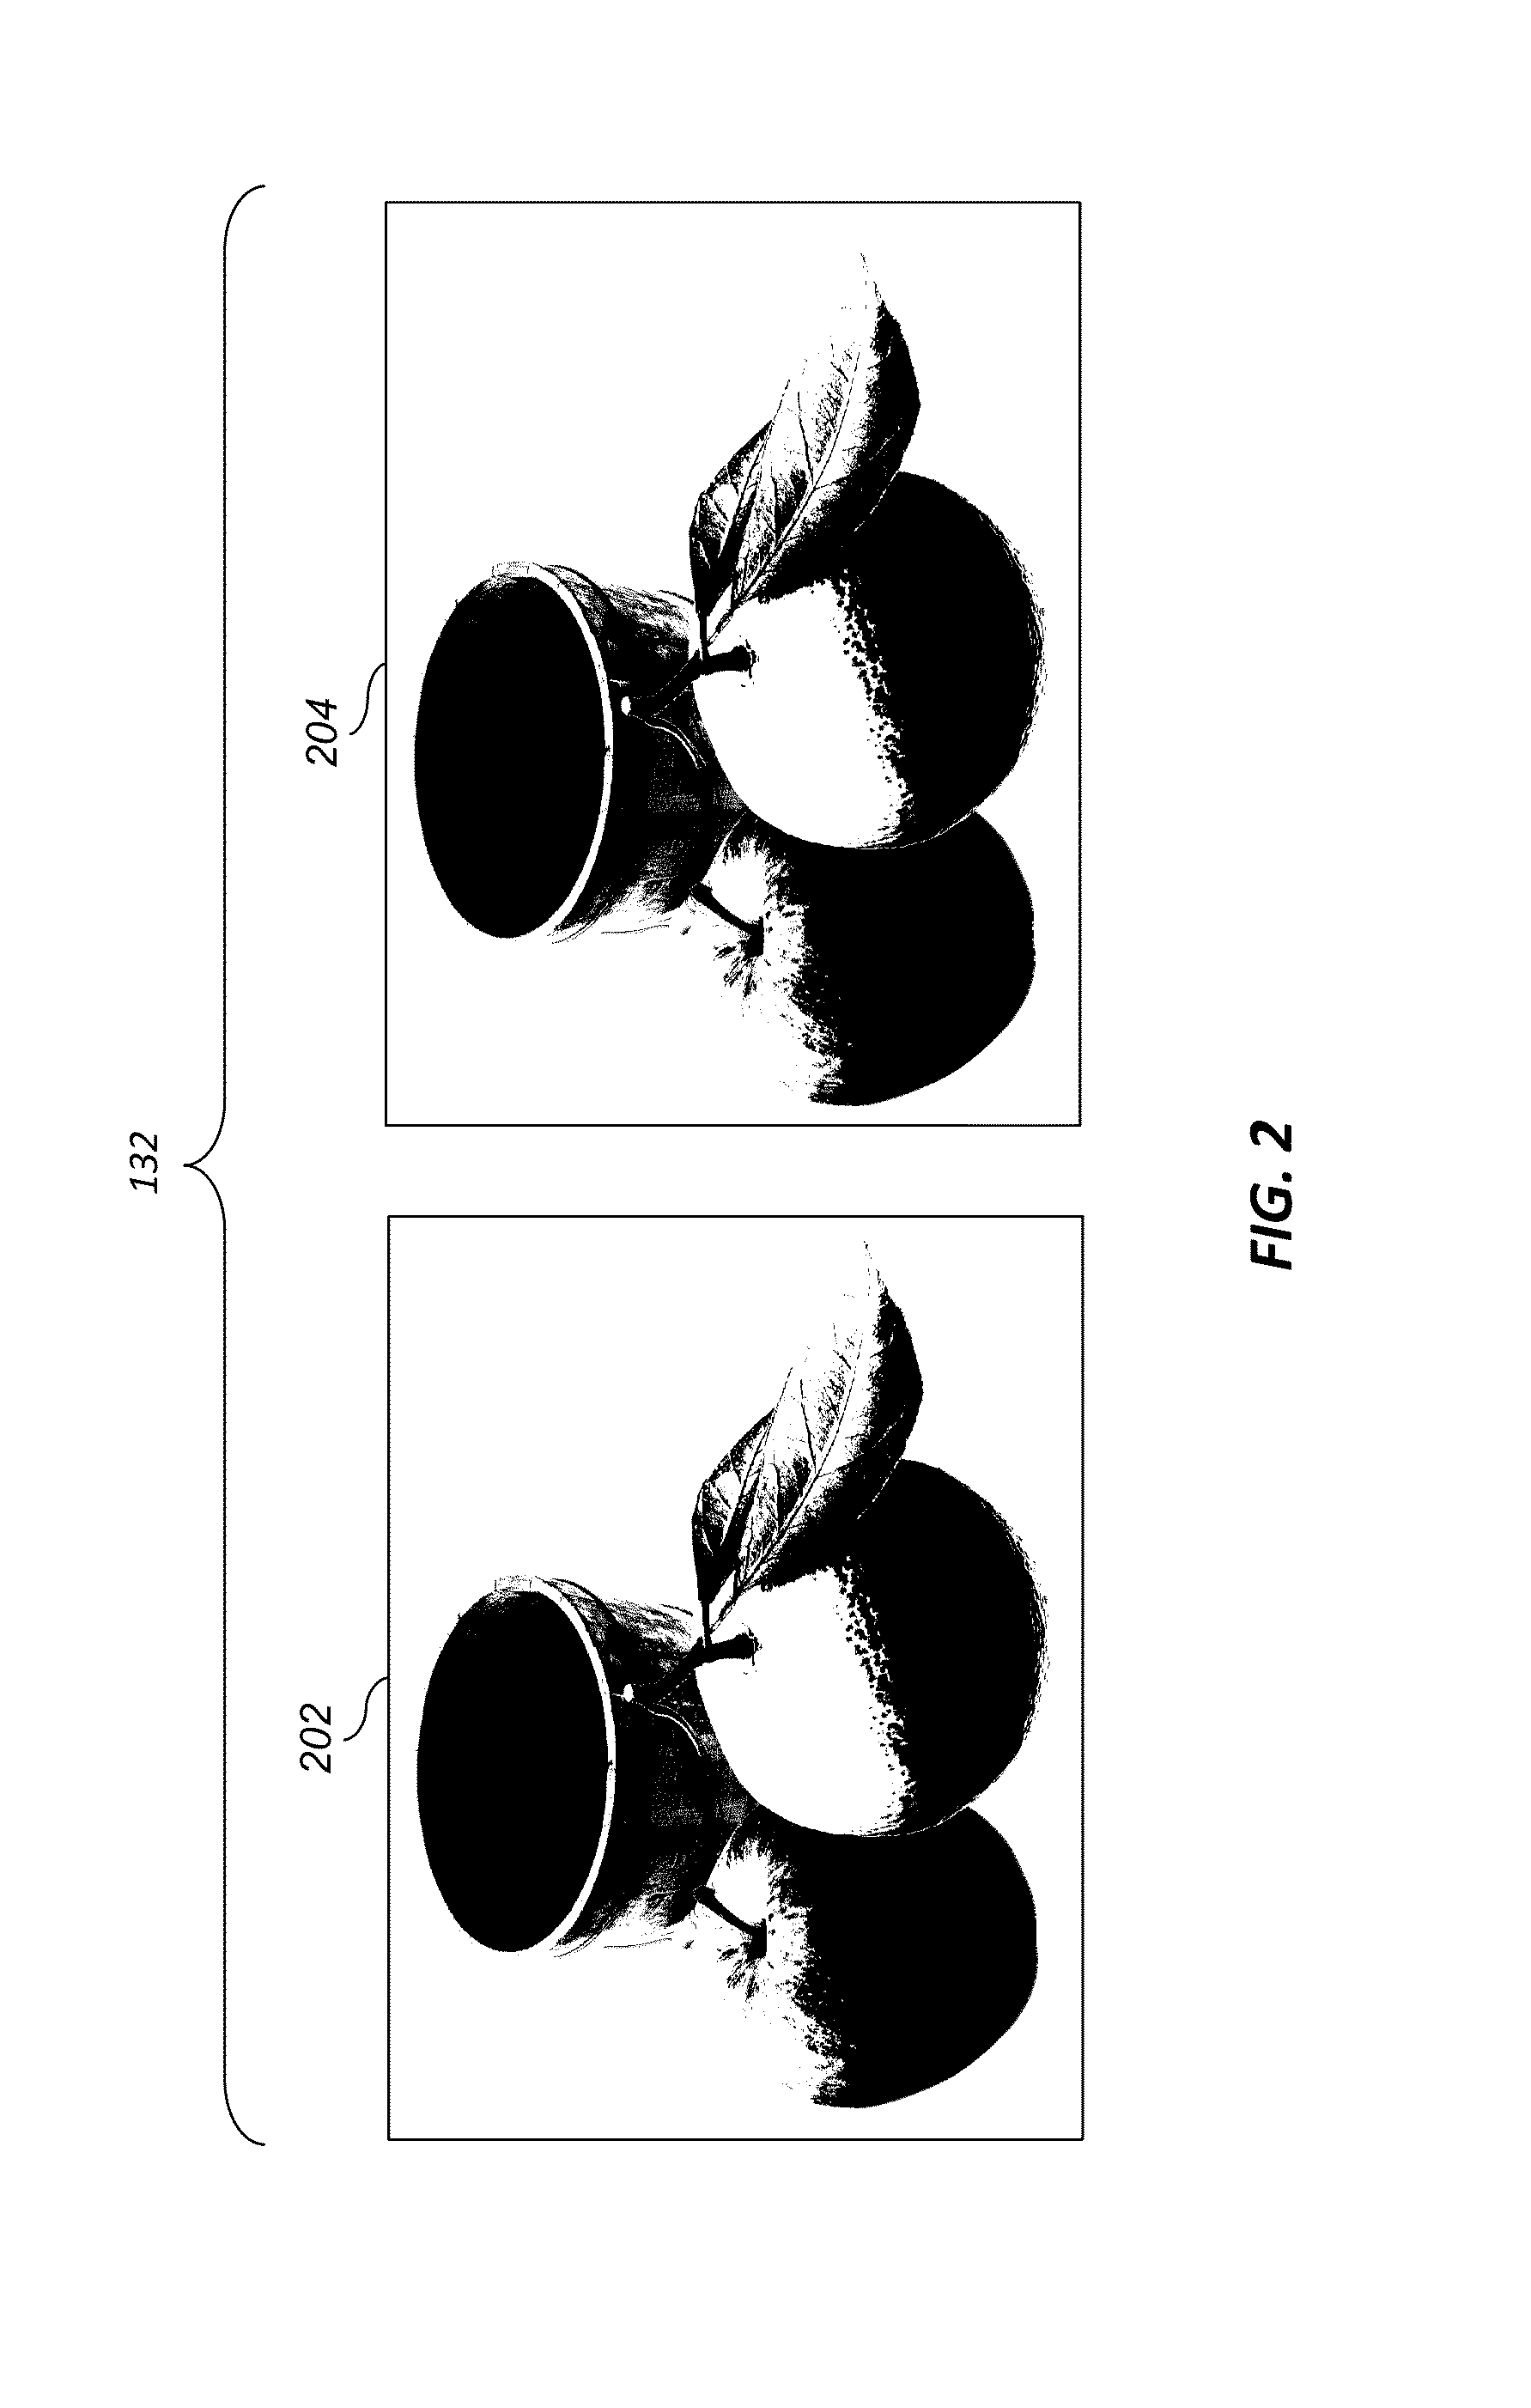 Method for automatically improving stereo images